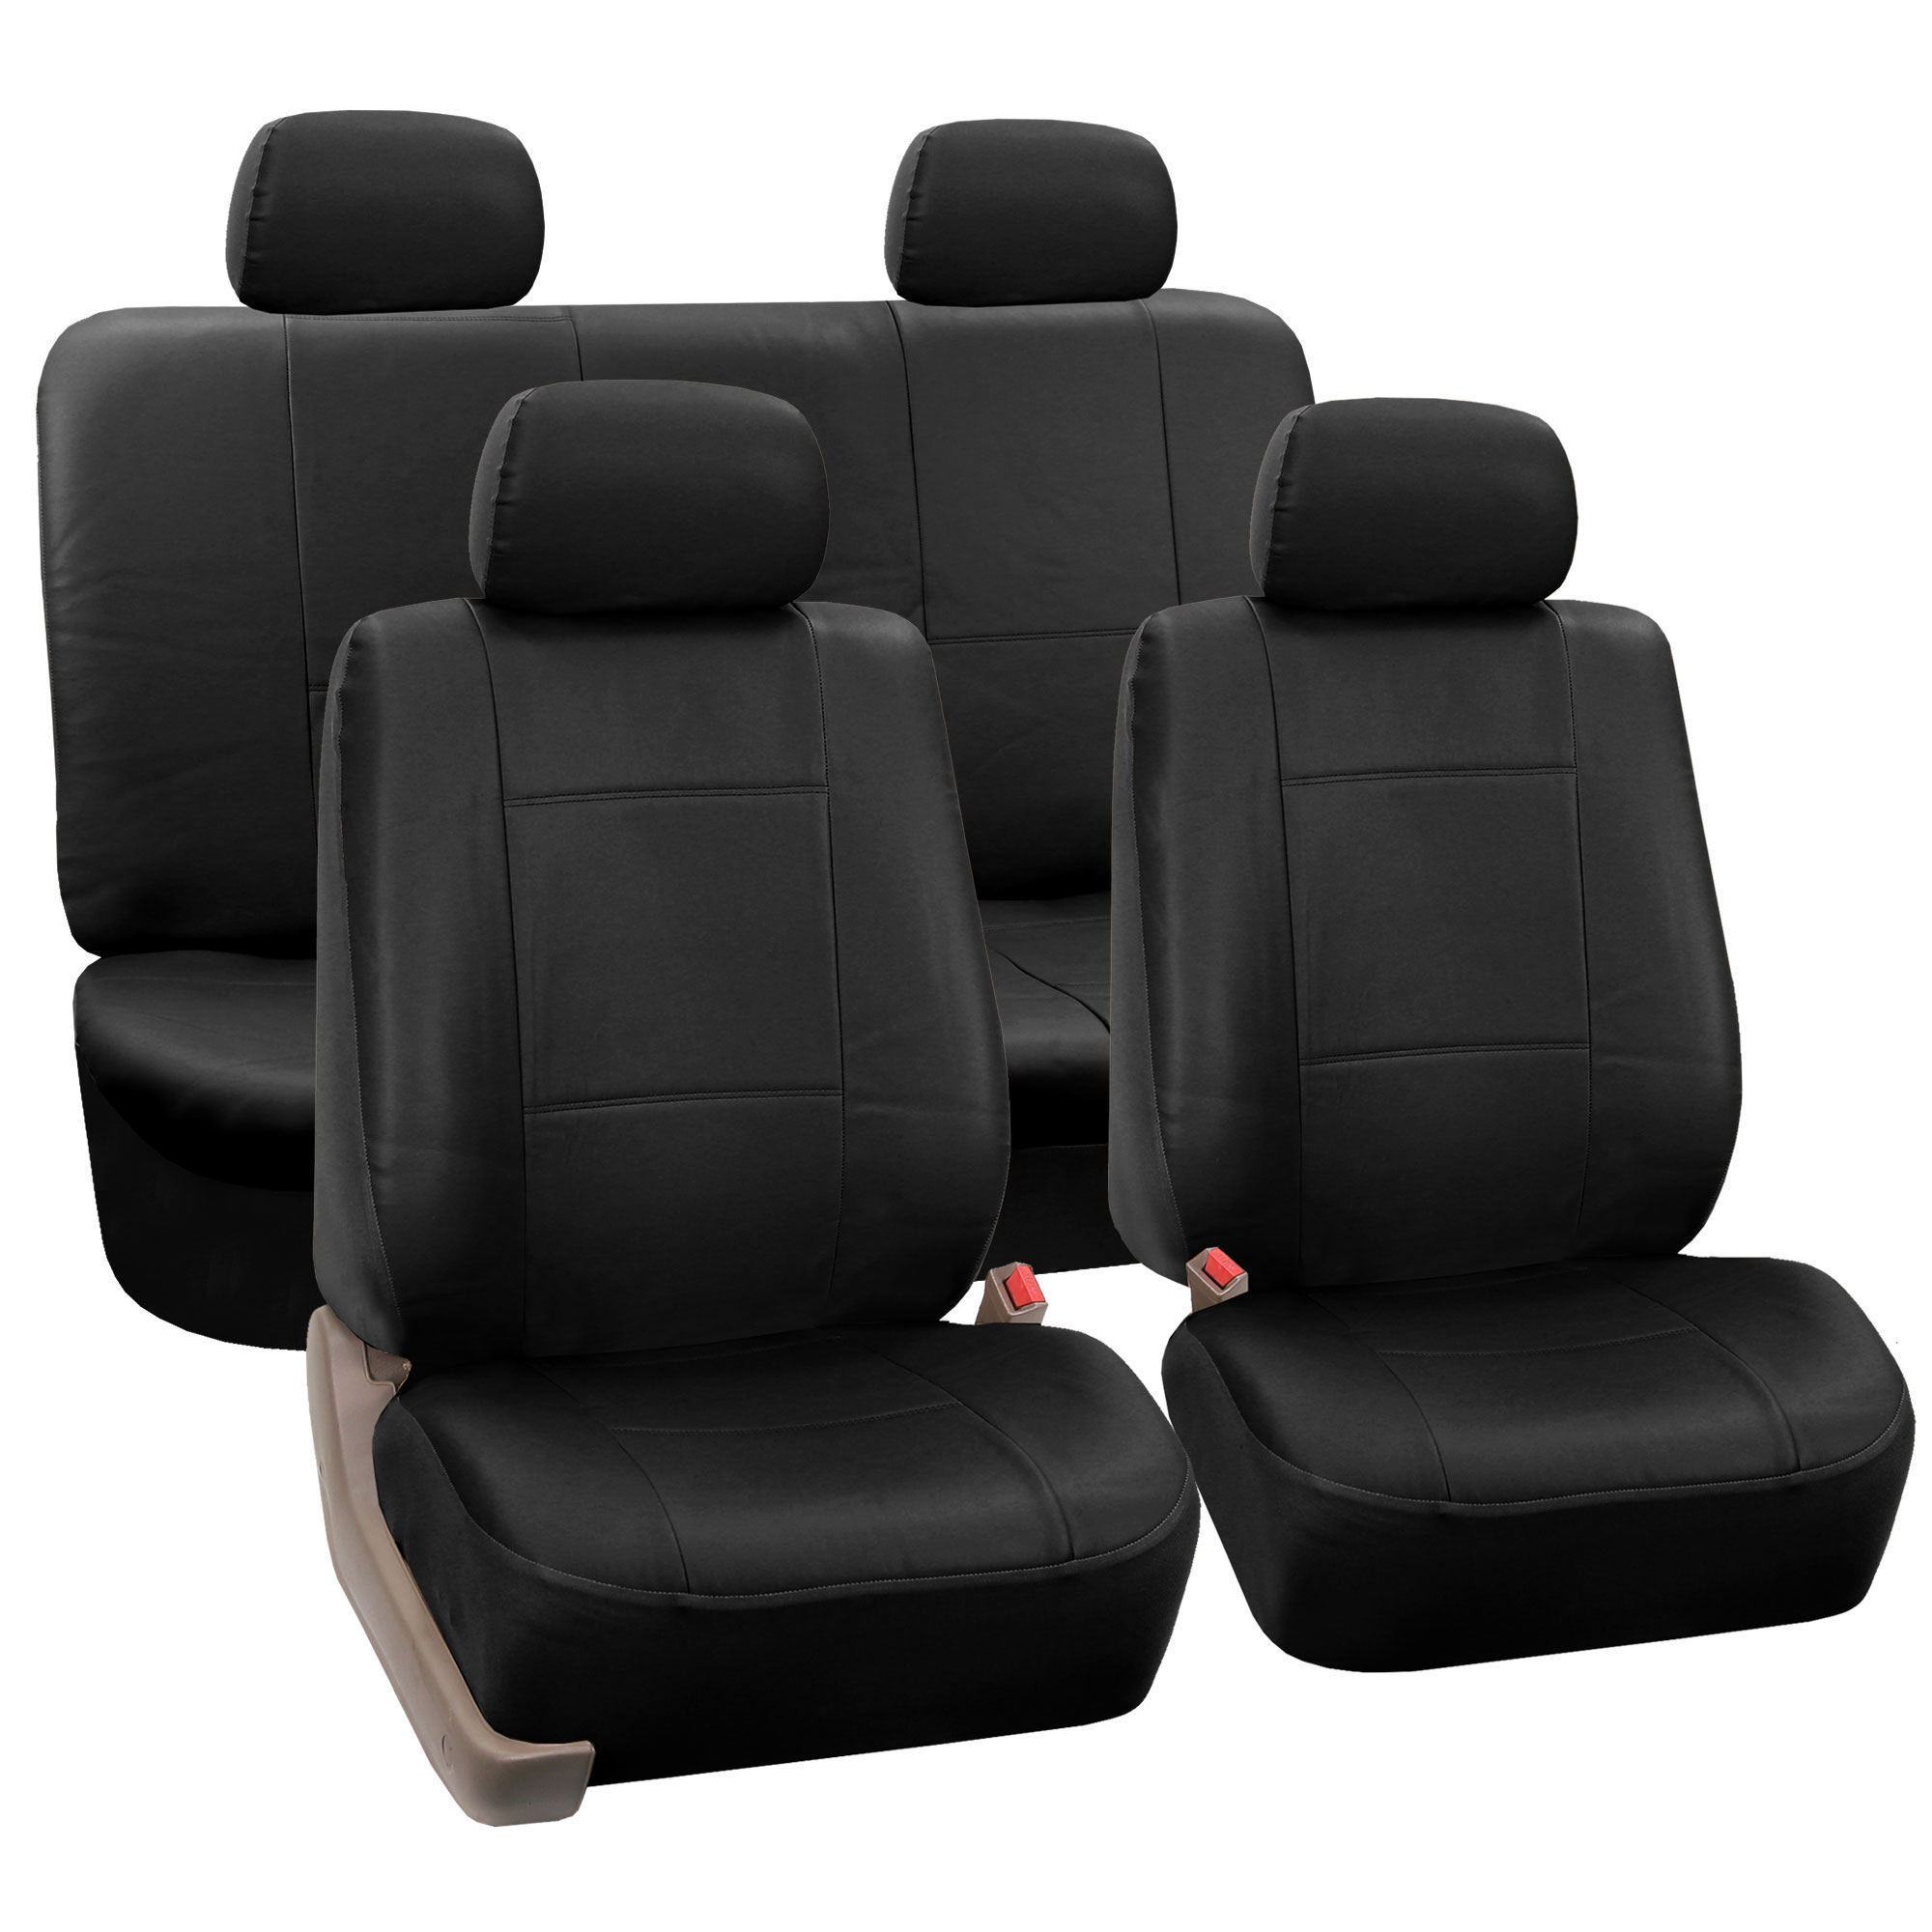 FH Group Faux Leather Airbag Compatible and Split Bench Car Seat Covers, Full Set, Black - image 1 of 4